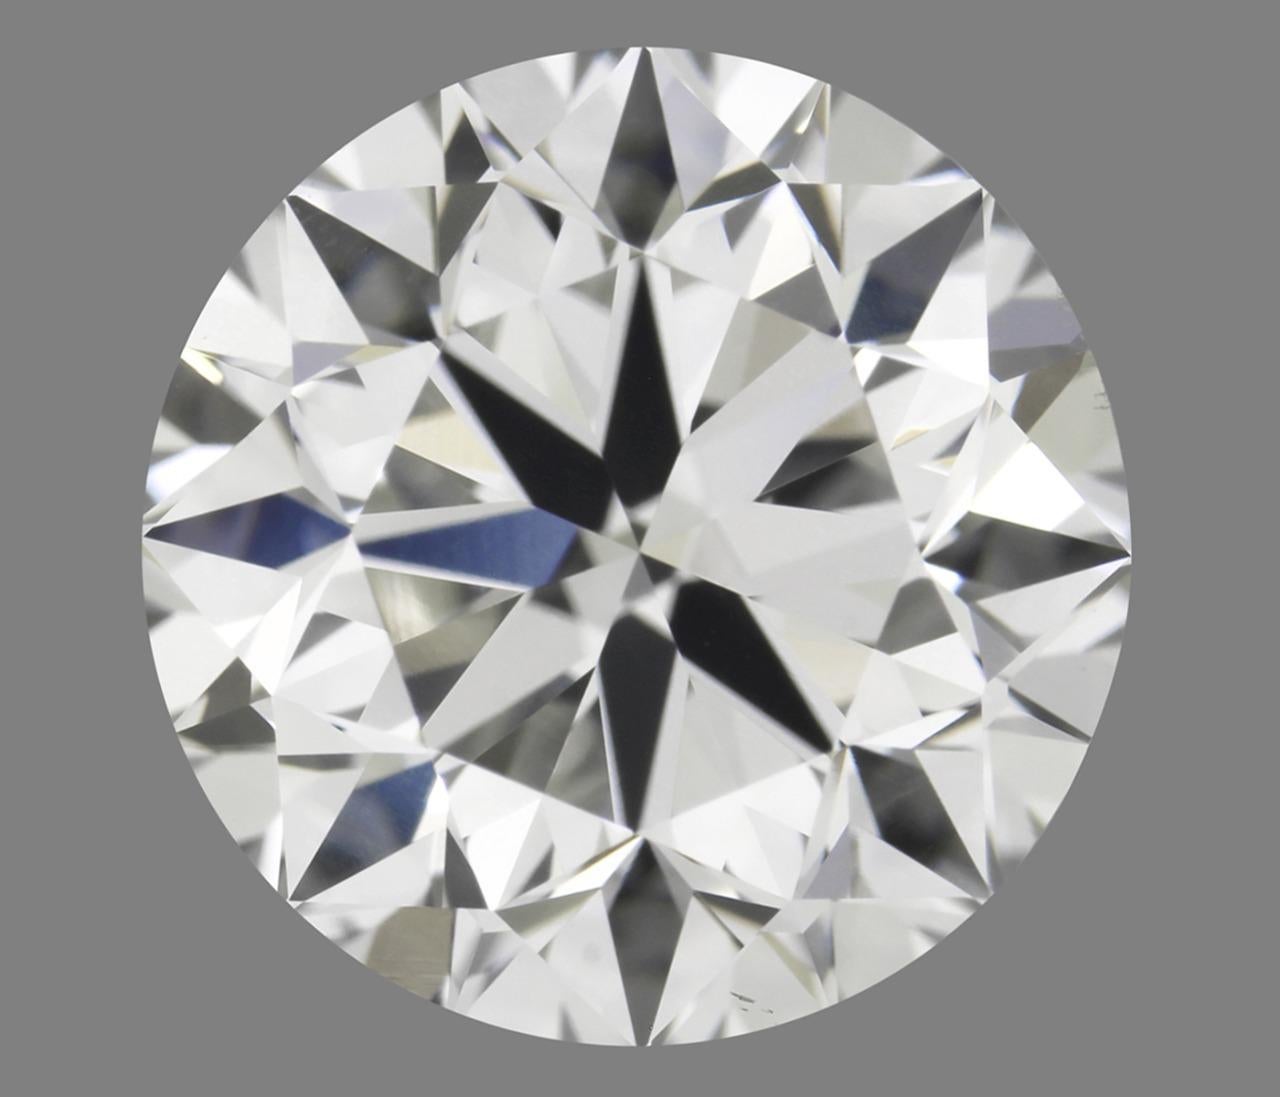 GIA Certified 0.50 Carat, D/VVS2, Brilliant Cut, Excellent Natural Diamond

Perfect Brilliants for perfect gifts.

5 C's:
Certificate: GIA
Carat: 0.50ct
Color: D
Clarity: VVS2(Very Very Slightly Included)
Cut: Excellent

Polish: Excellent
Symmetry: